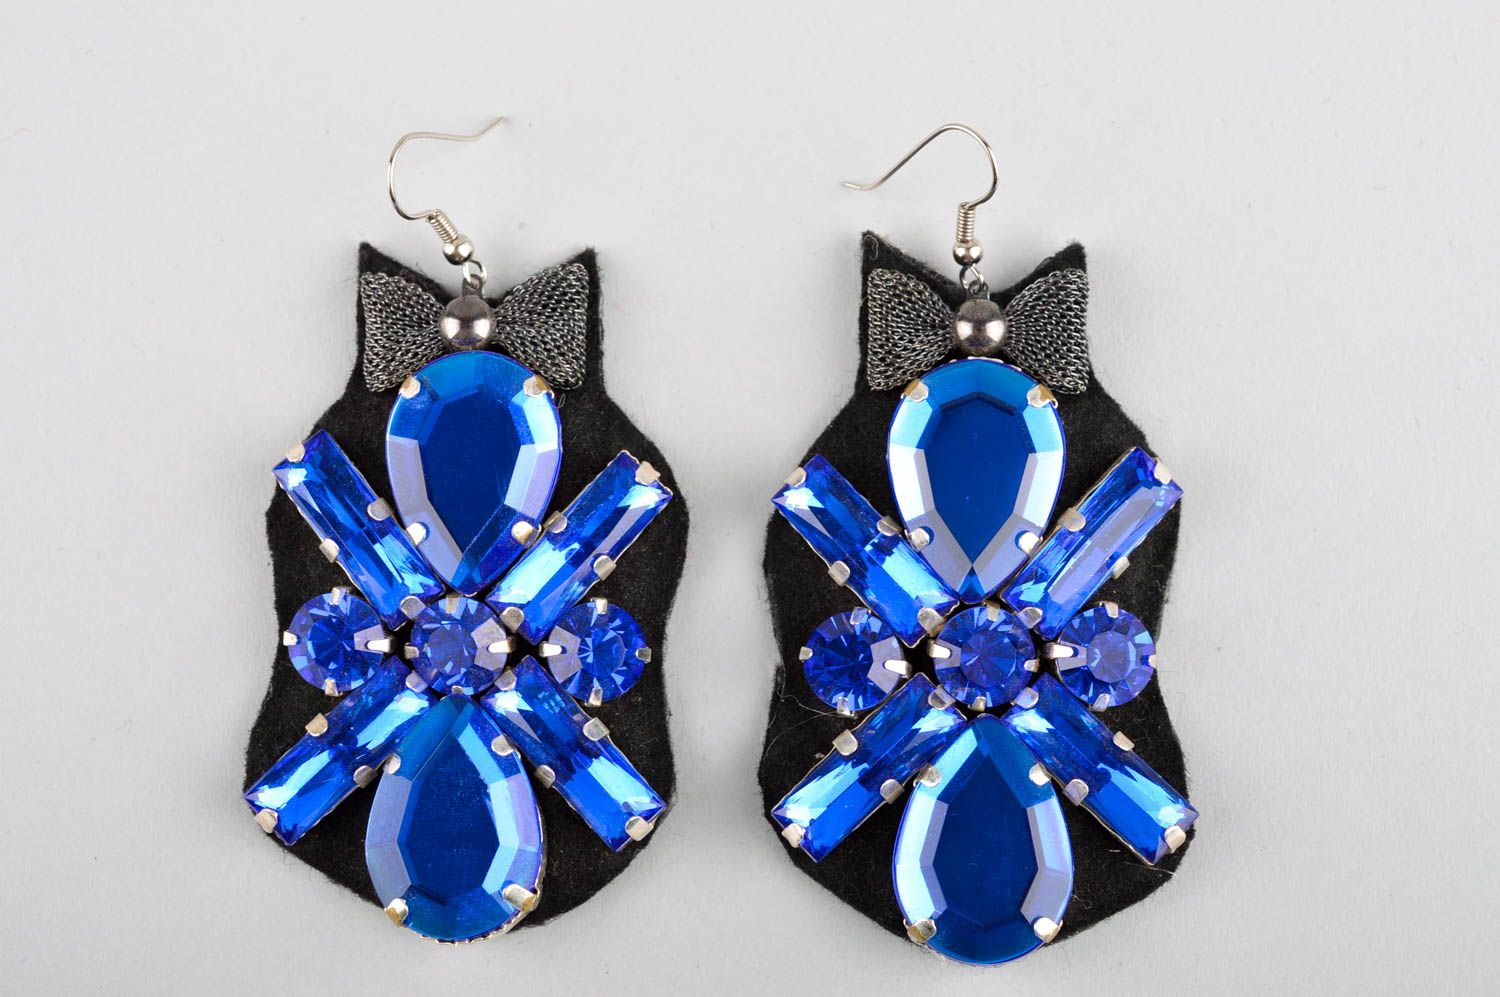 Evening earrings with crystals handmade accessories crystal jewelry for women photo 3